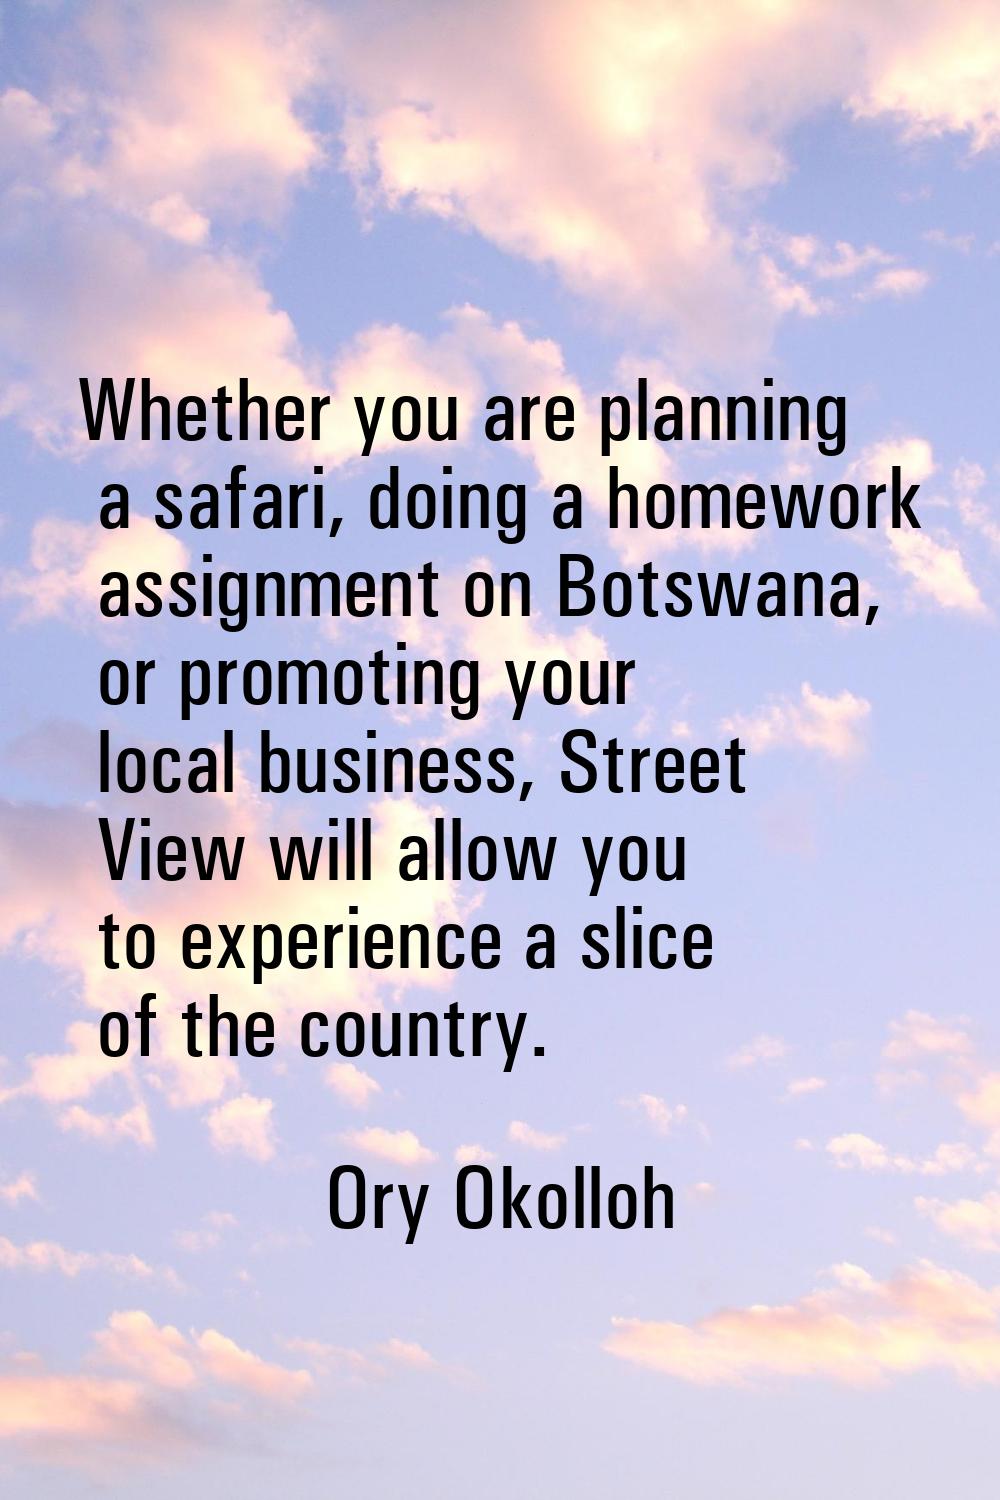 Whether you are planning a safari, doing a homework assignment on Botswana, or promoting your local